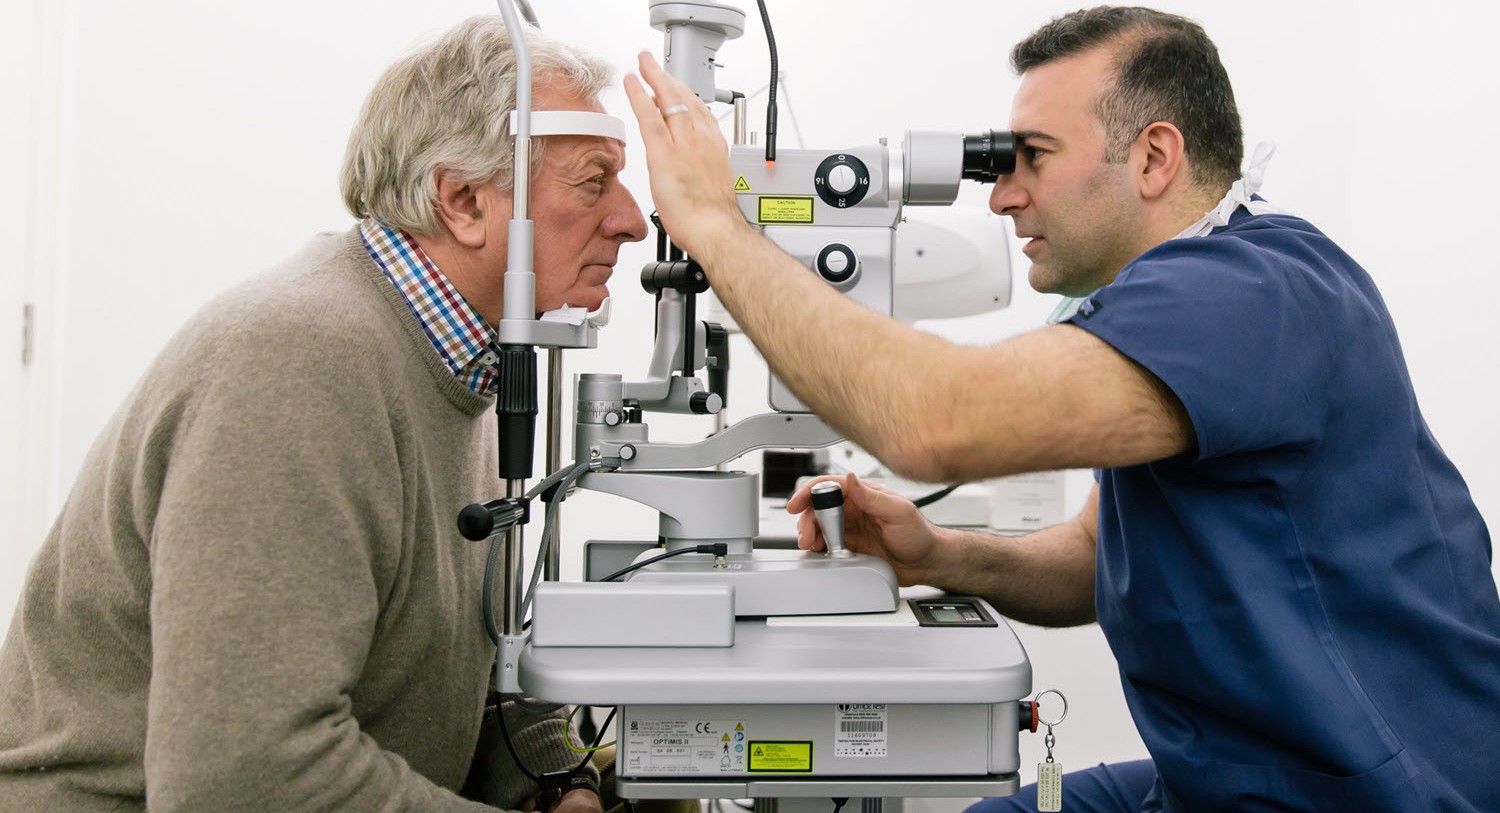 Pros and Cons of Laser Eye Surgery to Help You Weigh the Risks and Rewards